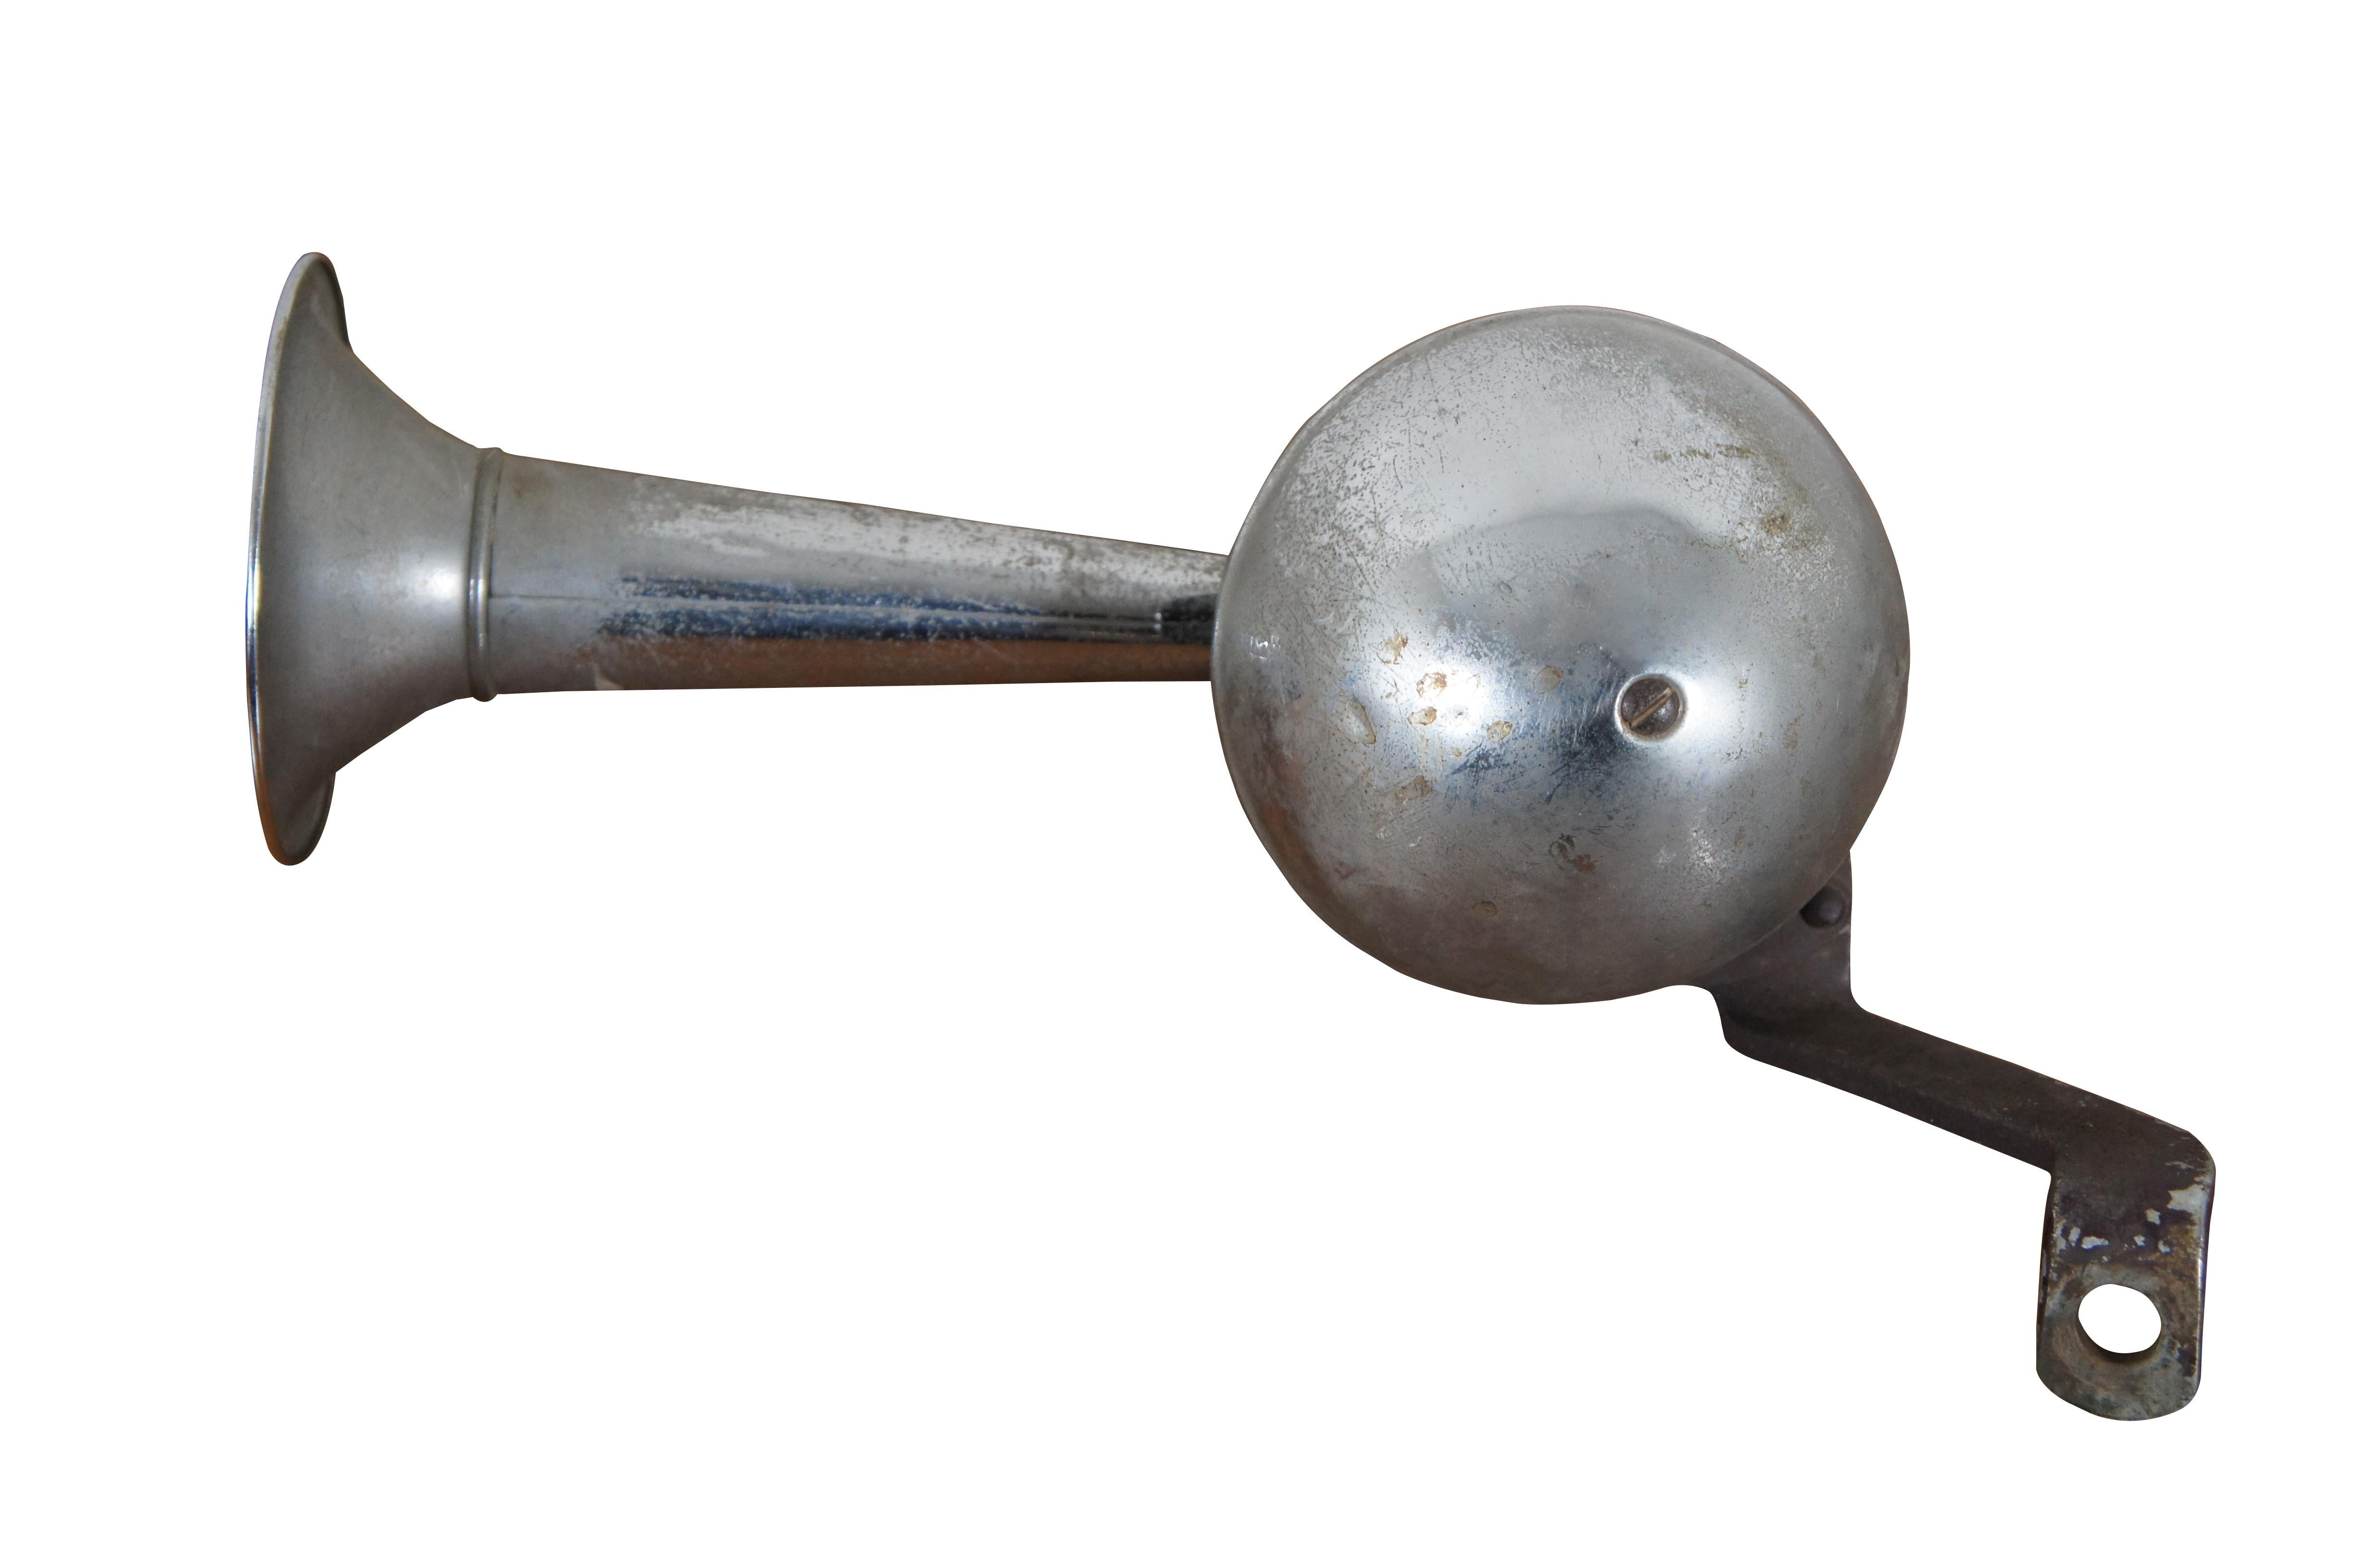 Pair of early to mid 20th century automobile or boat horns with compact trumpets and half round casing on mechanism.  Originally removed from an old Rolls Royce.

Dimensions:
8.25